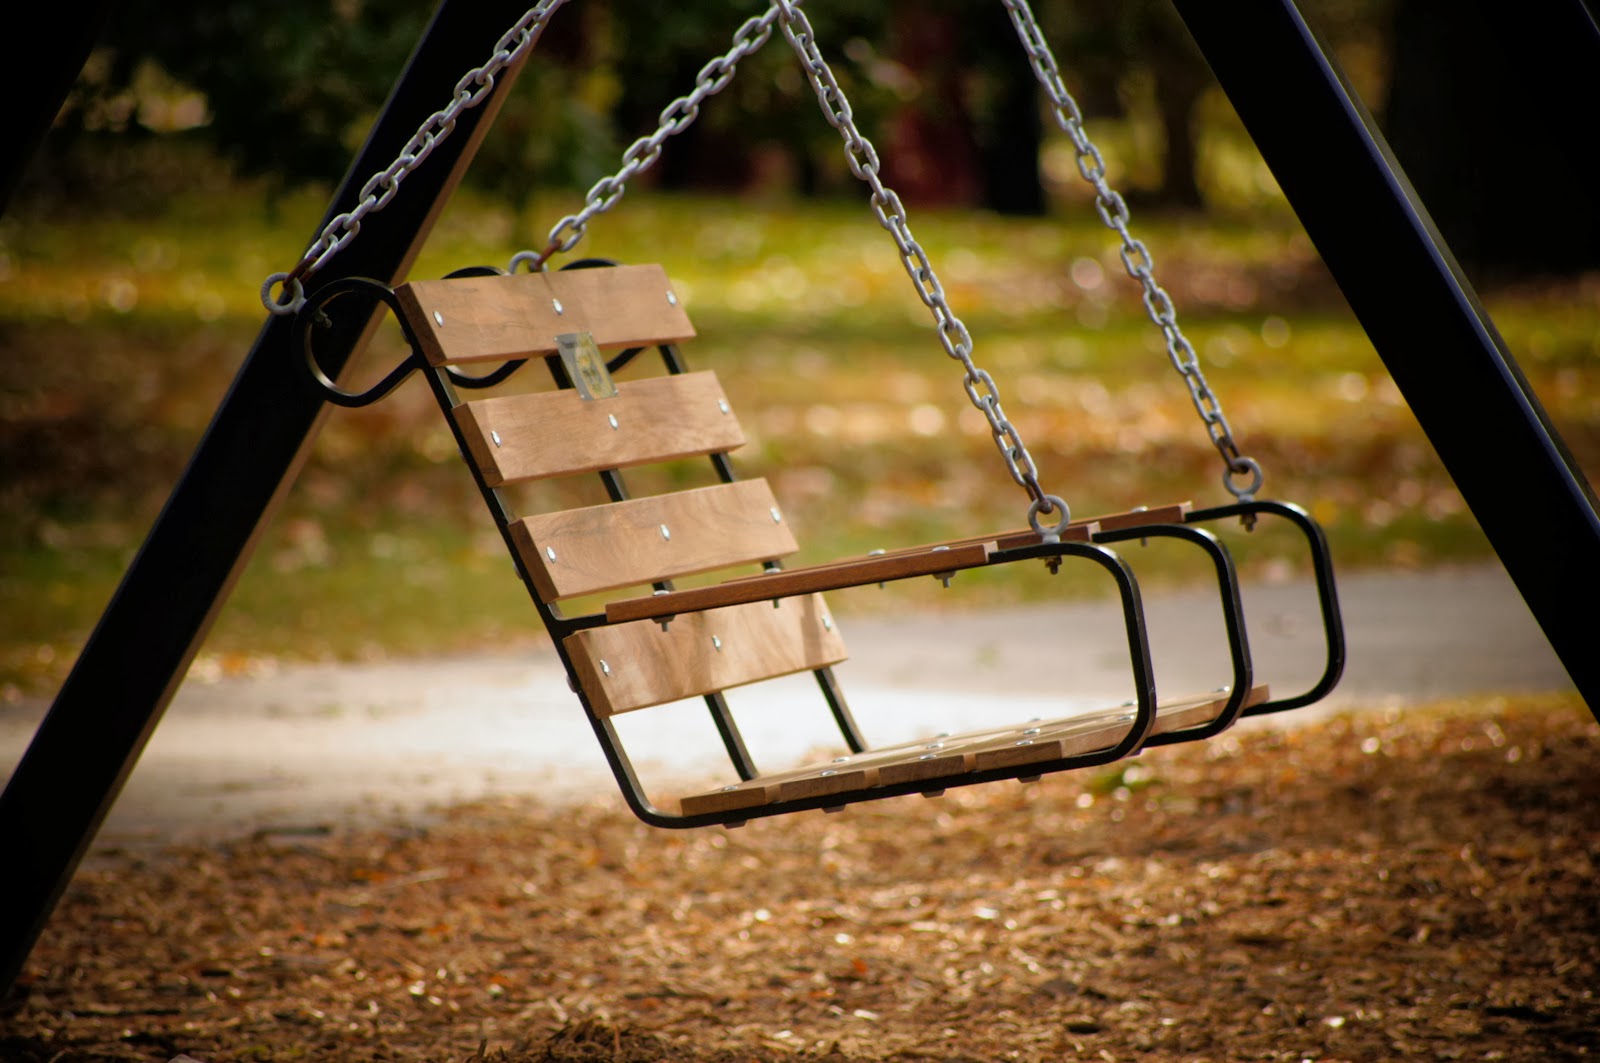 [park-swing-free-pictures-1%2520%25282699%2529%255B3%255D.jpg]